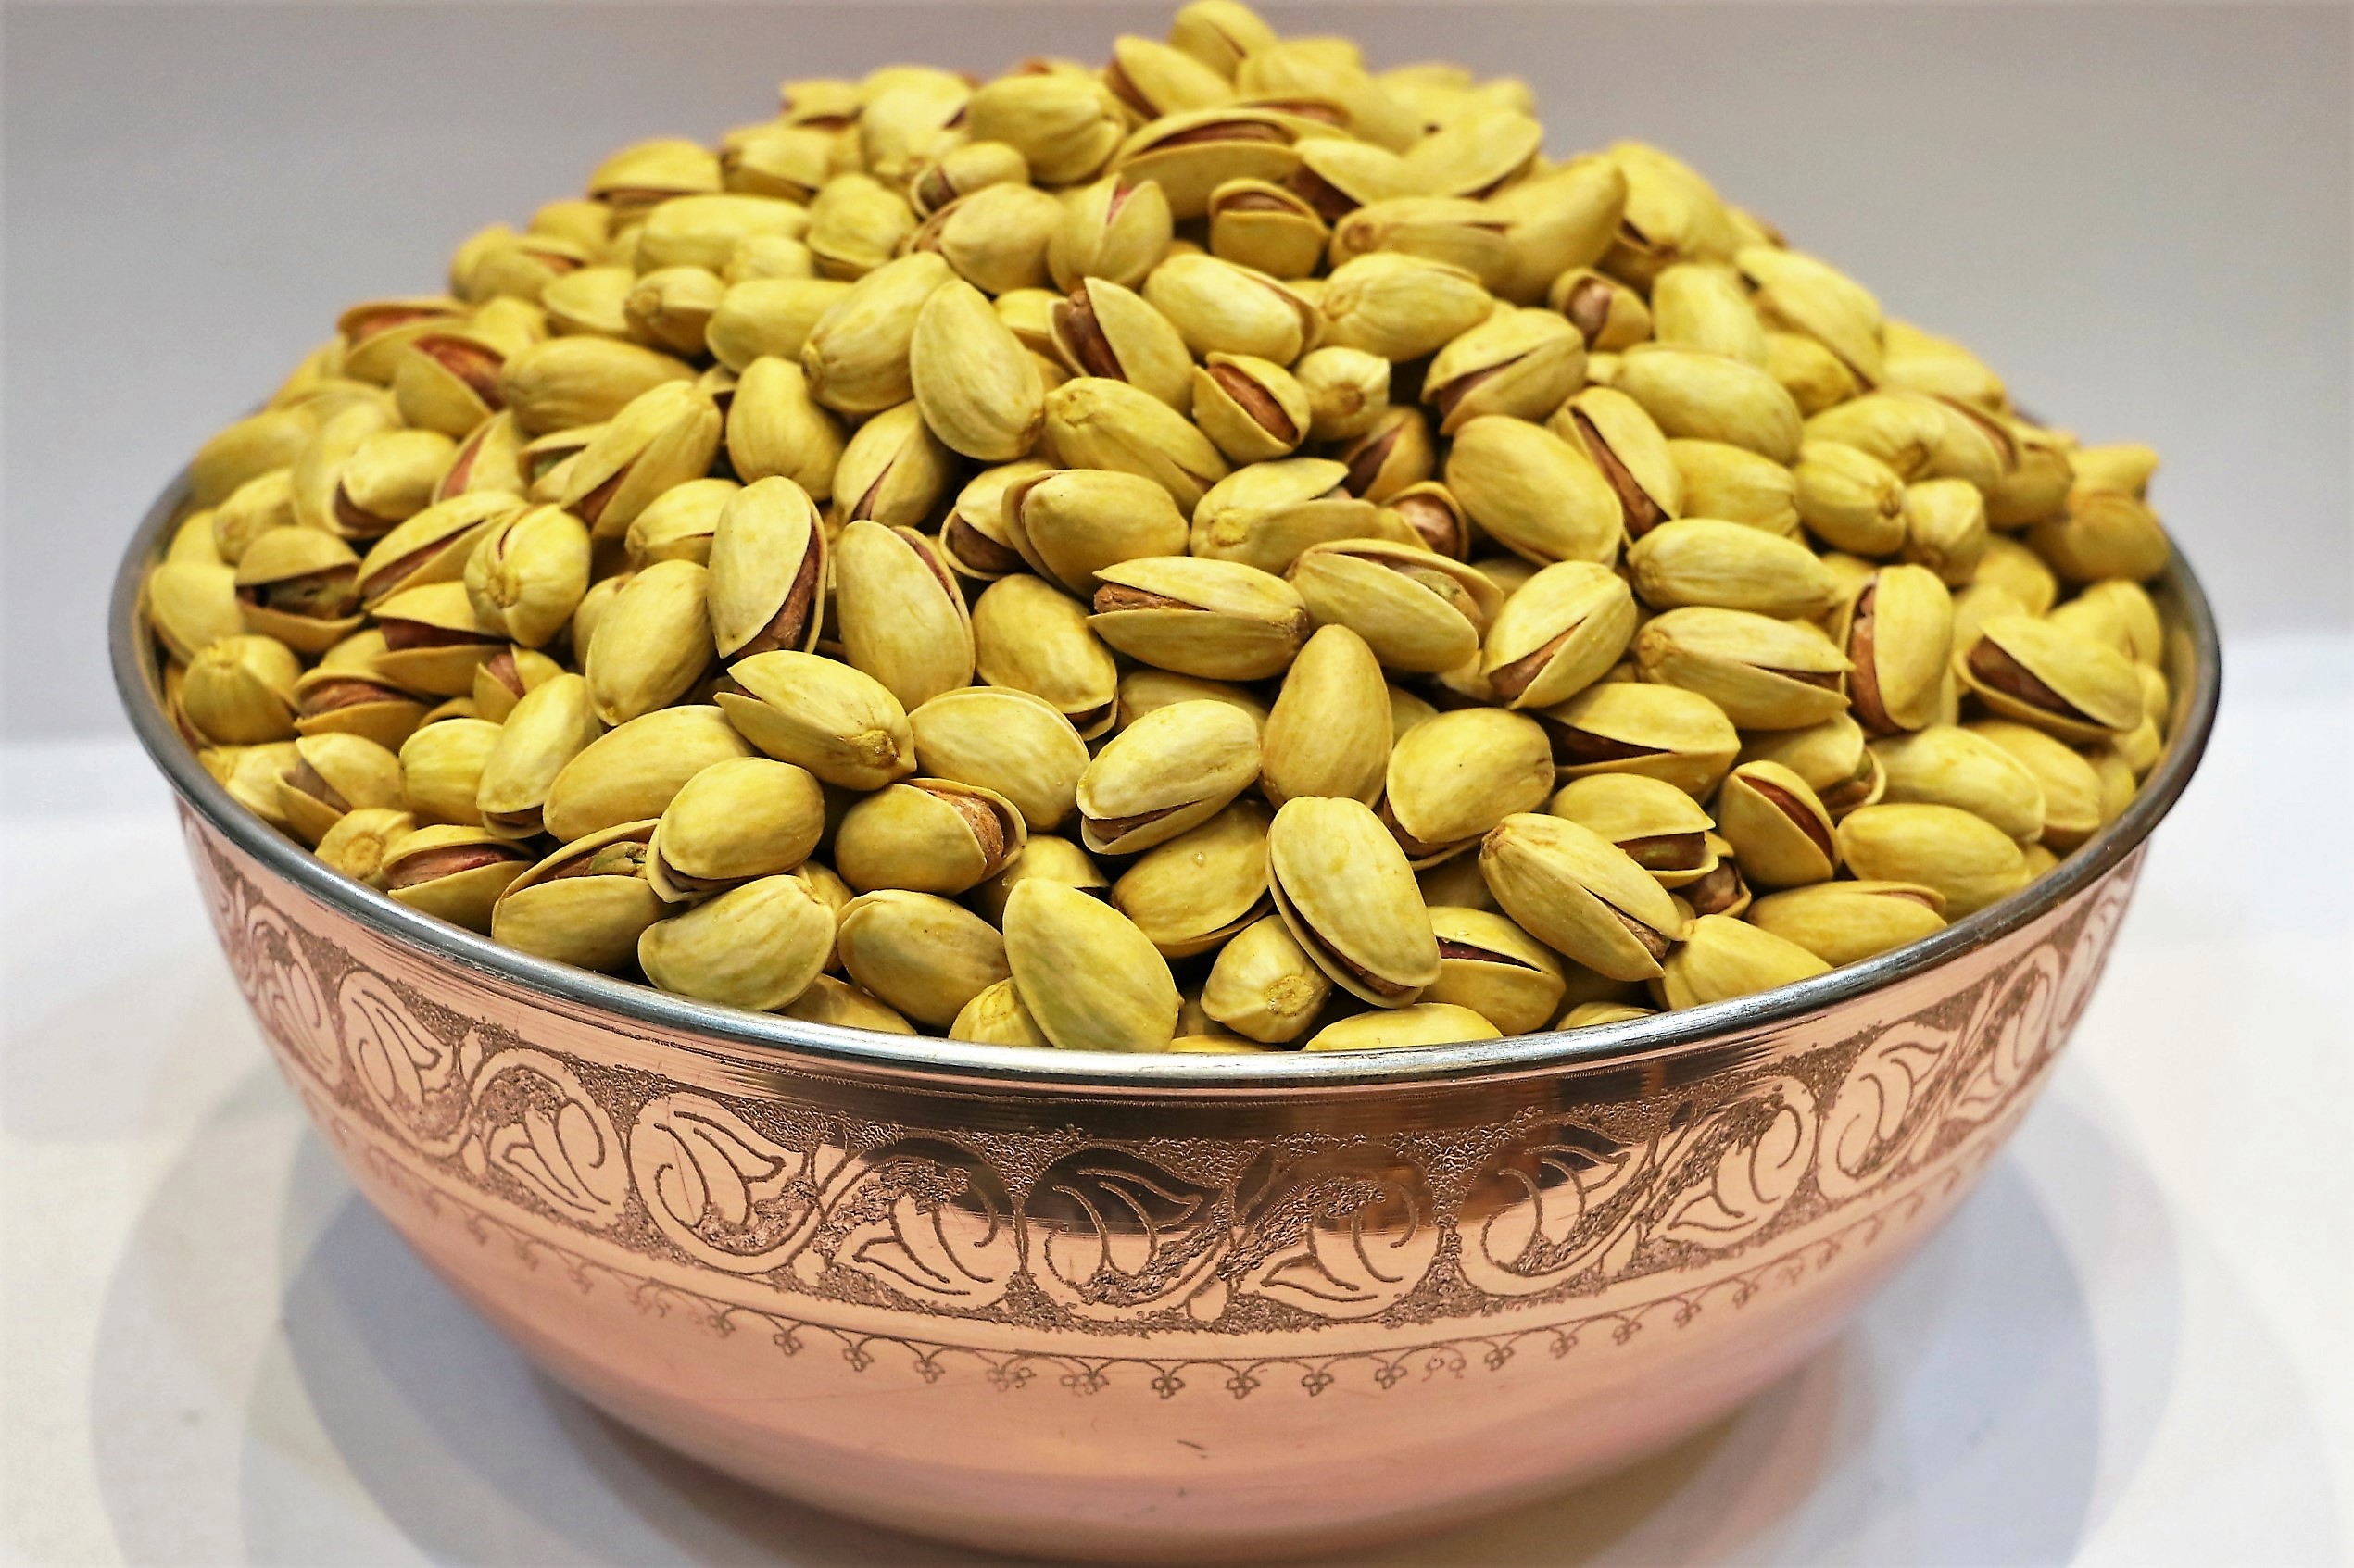 Production, processing, roasting, packaging and export of pistachios | Nutex Pistachio Company